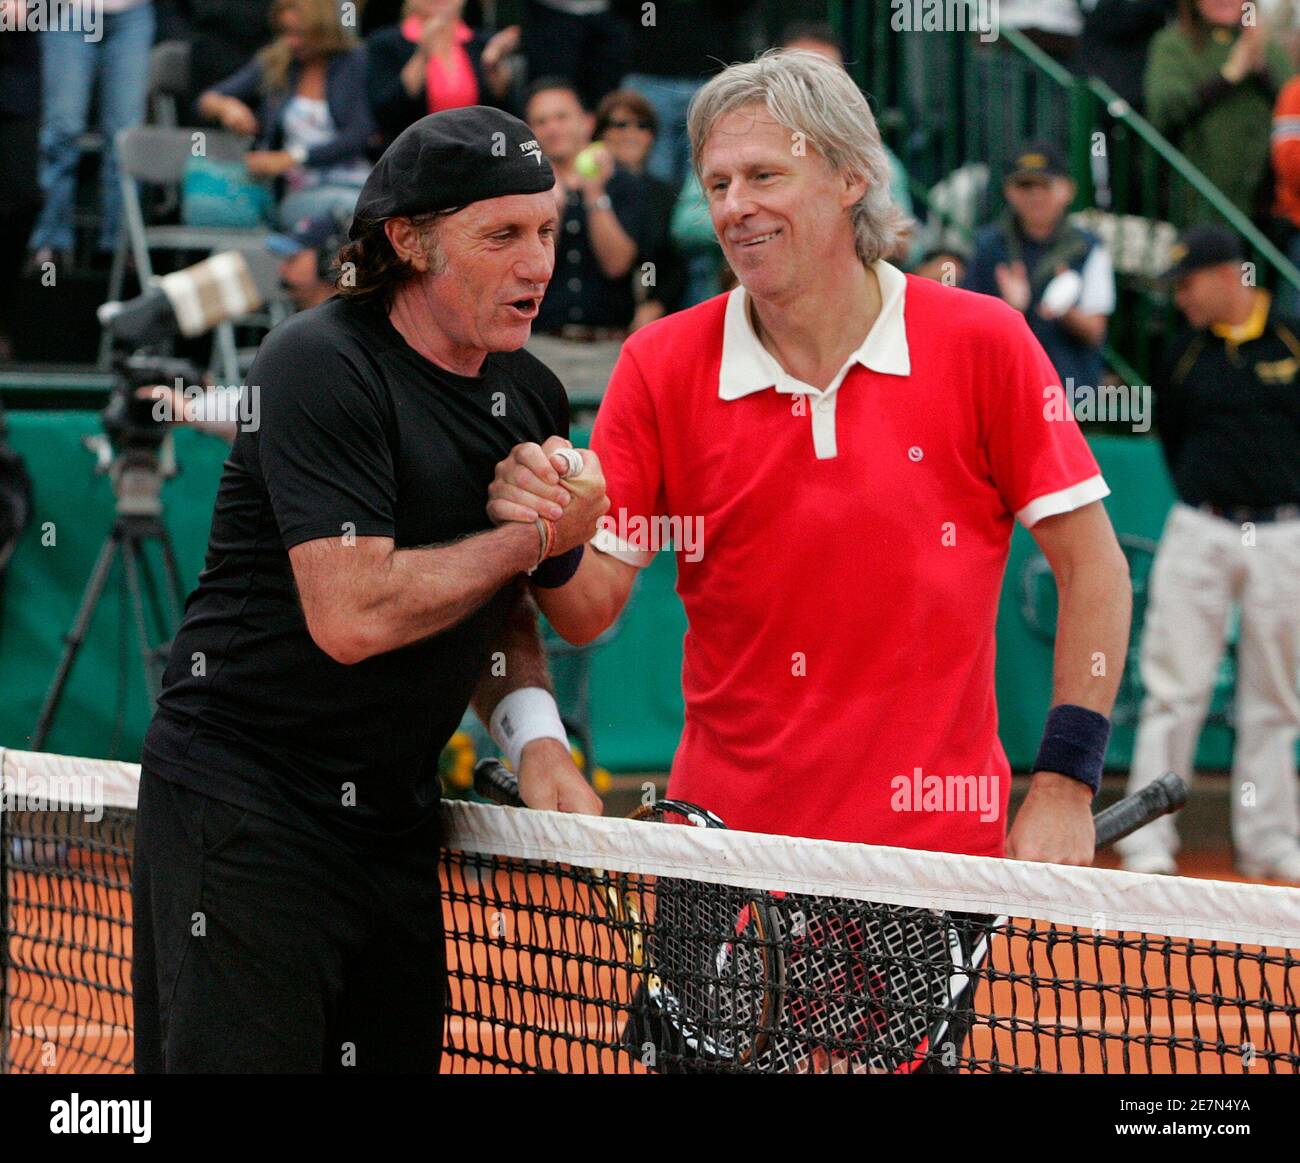 Former Argentine tennis player Guillermo Vilas (L) greets former Swedish  tennis player Bjorn Borg during an exhibition game in Bogota, Colombia  April 29, 2007. REUTERS/Daniel Munoz (COLOMBIA Stock Photo - Alamy